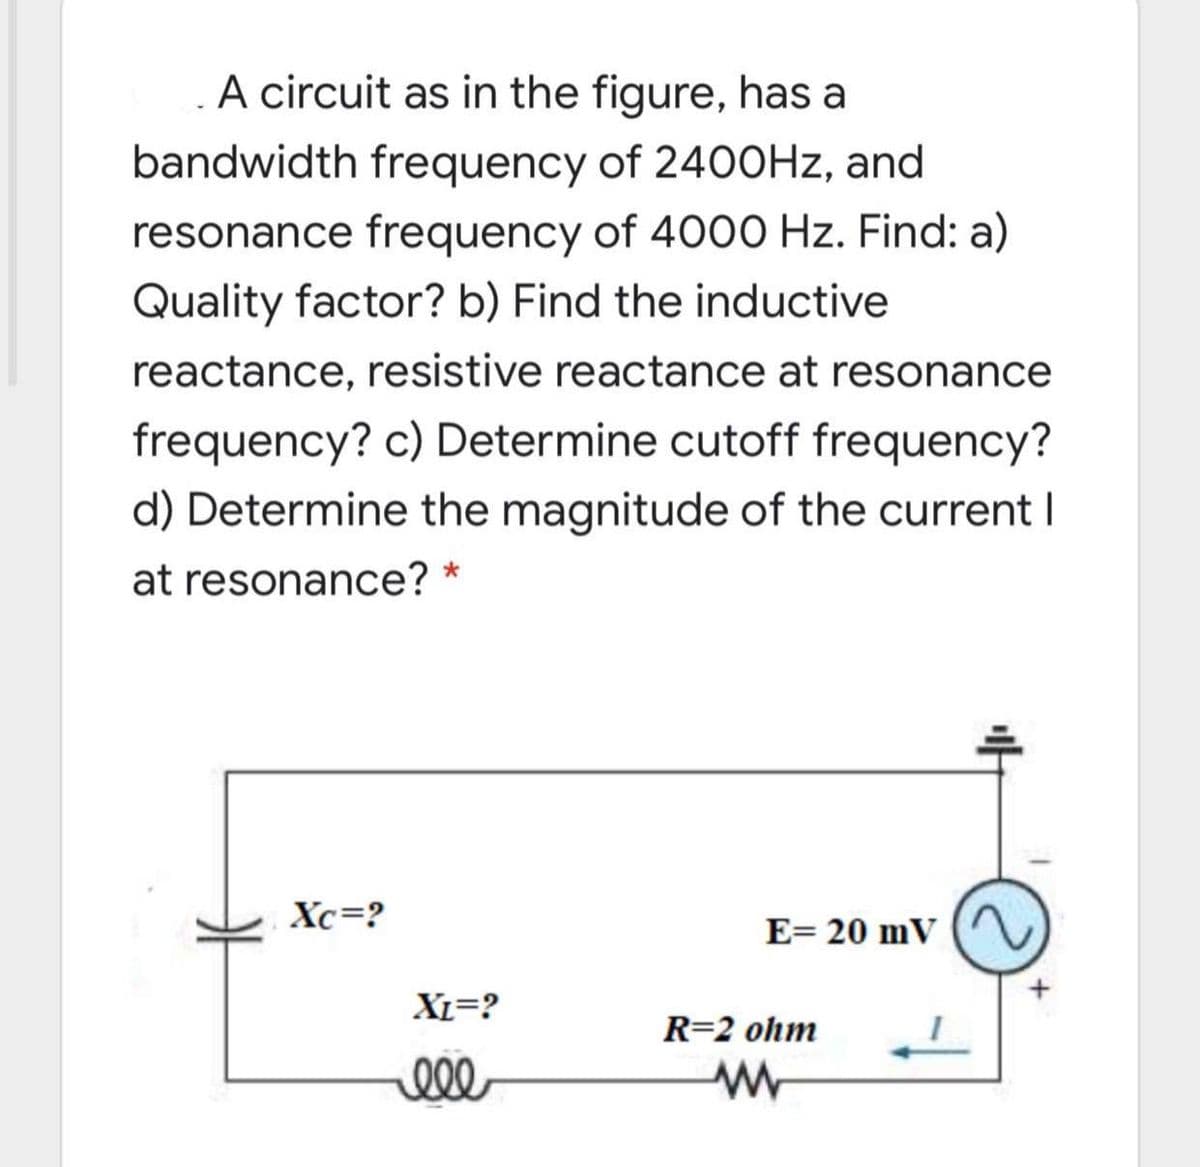 A circuit as in the figure, has a
bandwidth frequency of 2400HZ, and
resonance frequency of 4000 Hz. Find: a)
Quality factor? b) Find the inductive
reactance, resistive reactance at resonance
frequency? c) Determine cutoff frequency?
d) Determine the magnitude of the current I
at resonance? *
Xc=?
E= 20 mV
XL=?
R=2 ohm
ell
